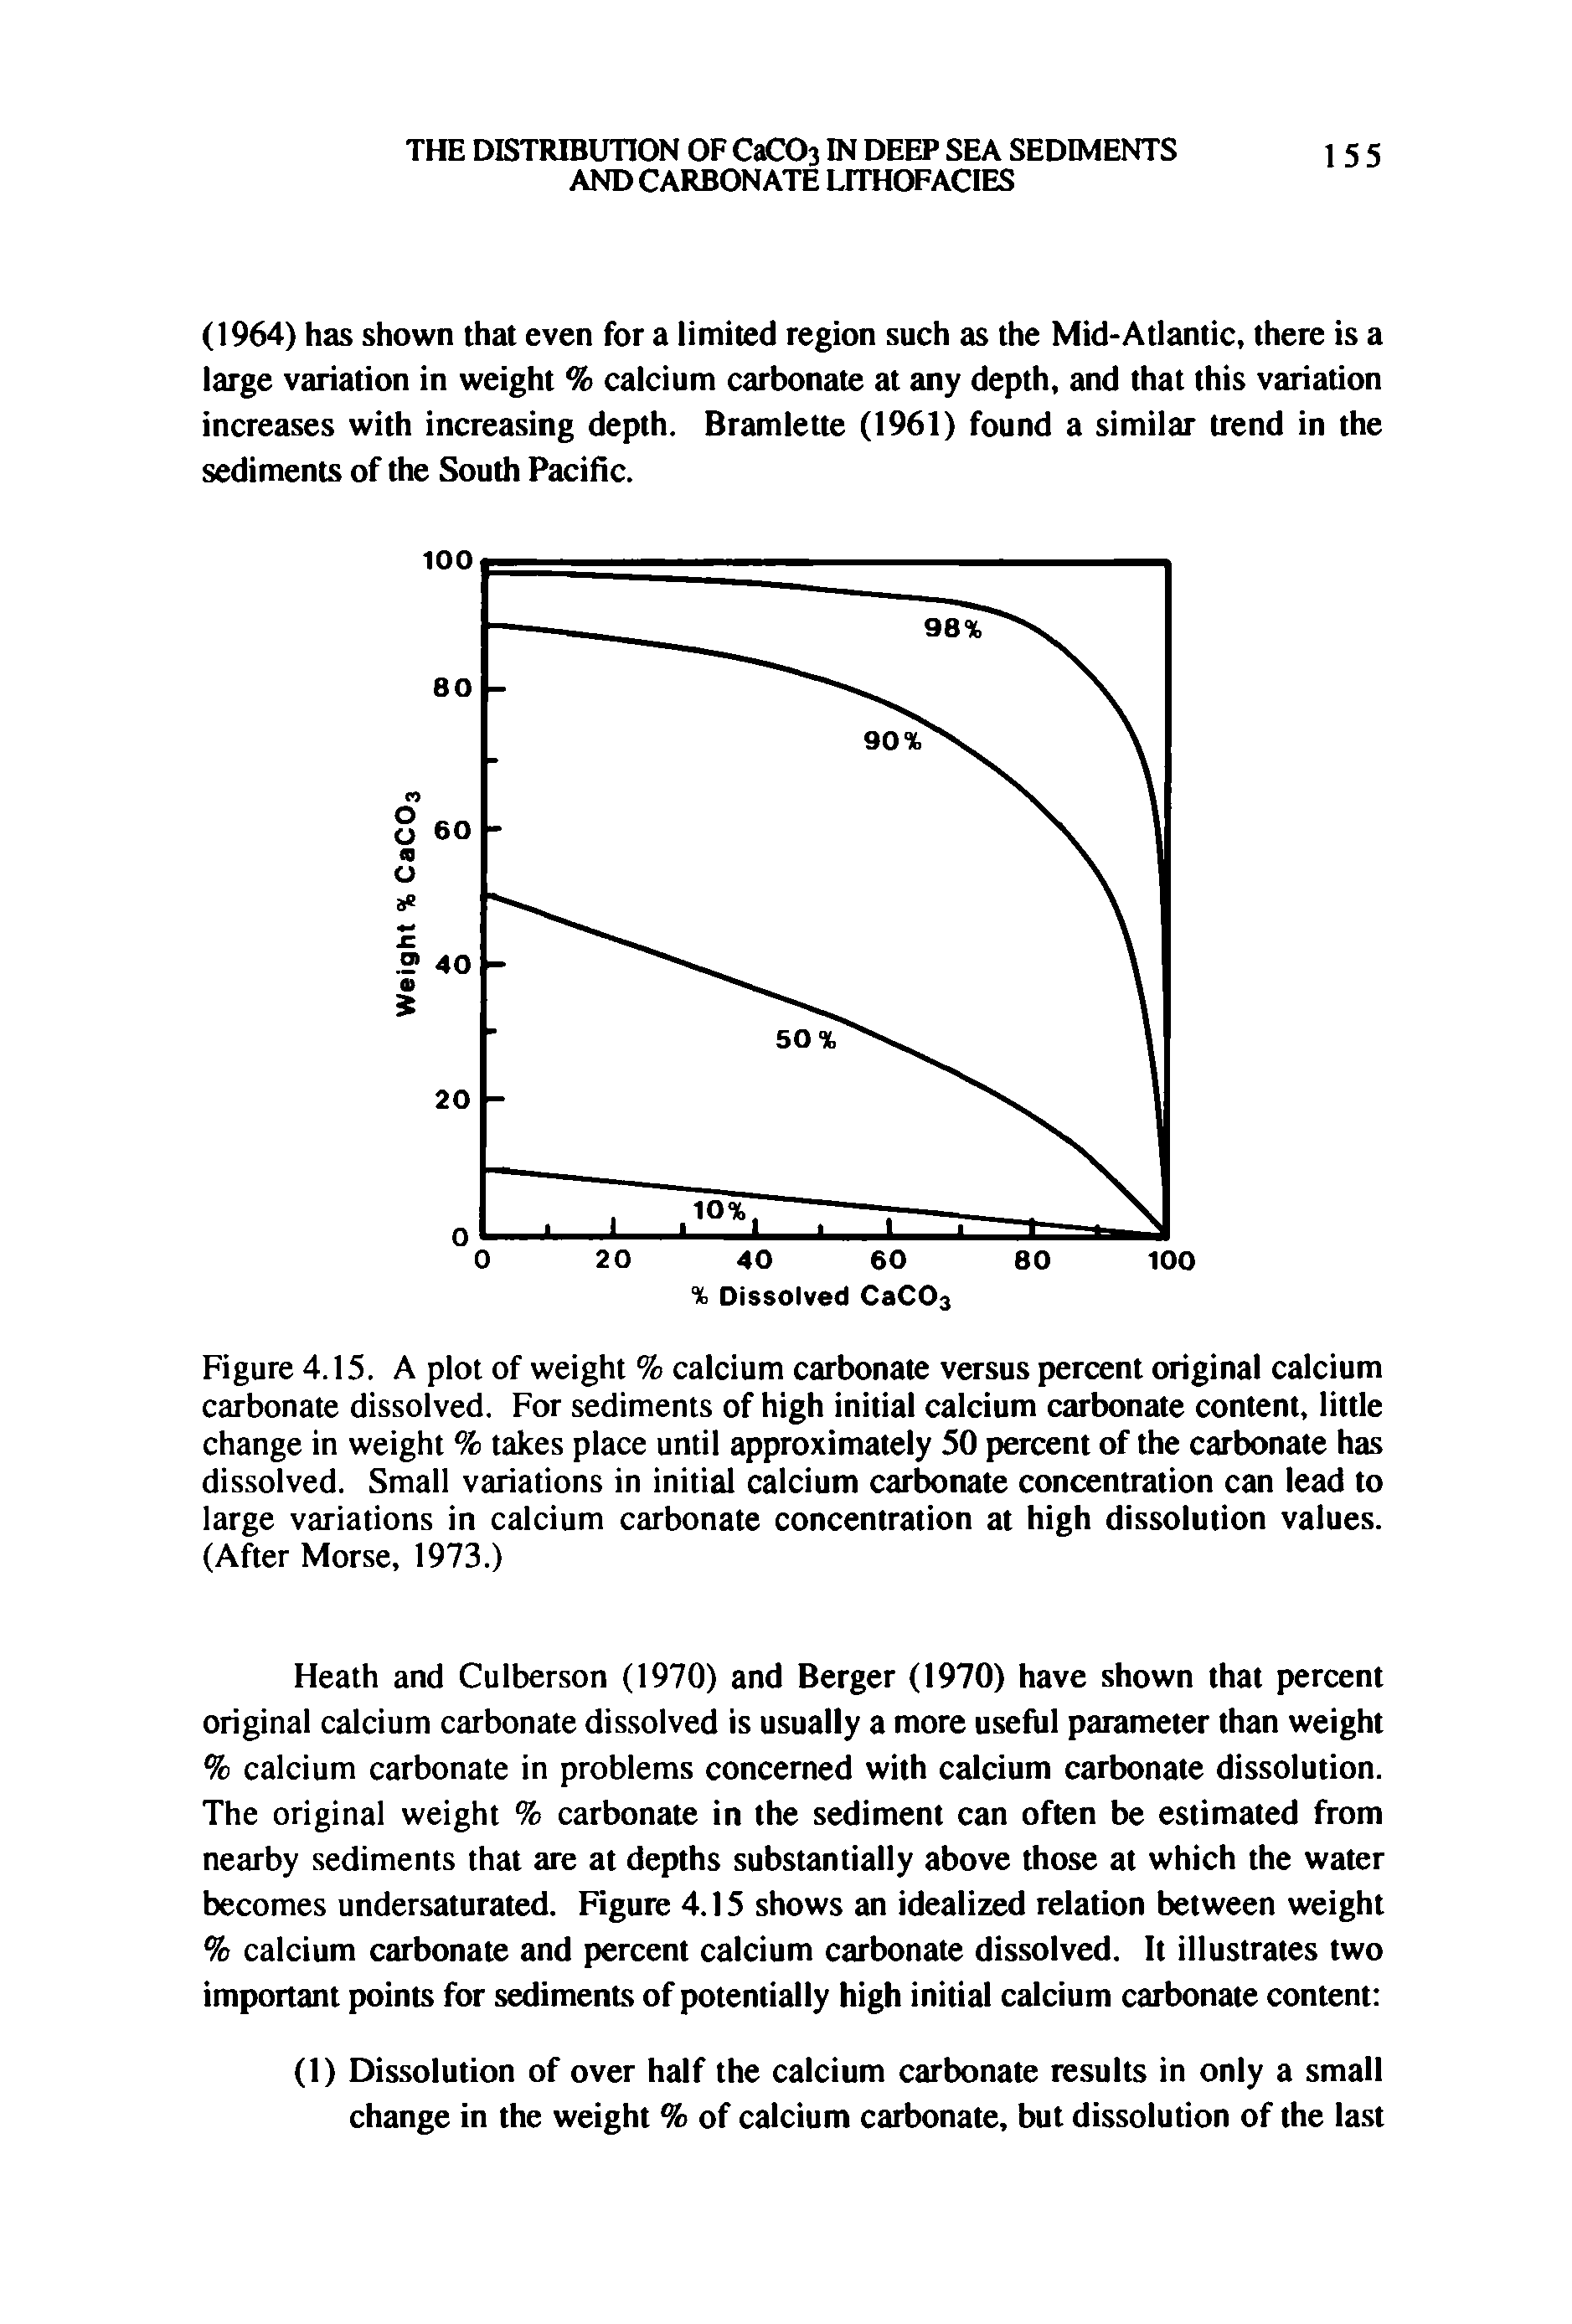 Figure 4.15. A plot of weight % calcium carbonate versus percent original calcium carbonate dissolved. For sediments of high initial calcium carbonate content, little change in weight % takes place until approximately 50 percent of the carbonate has dissolved. Small variations in initial calcium carbonate concentration can lead to large variations in calcium carbonate concentration at high dissolution values. (After Morse, 1973.)...